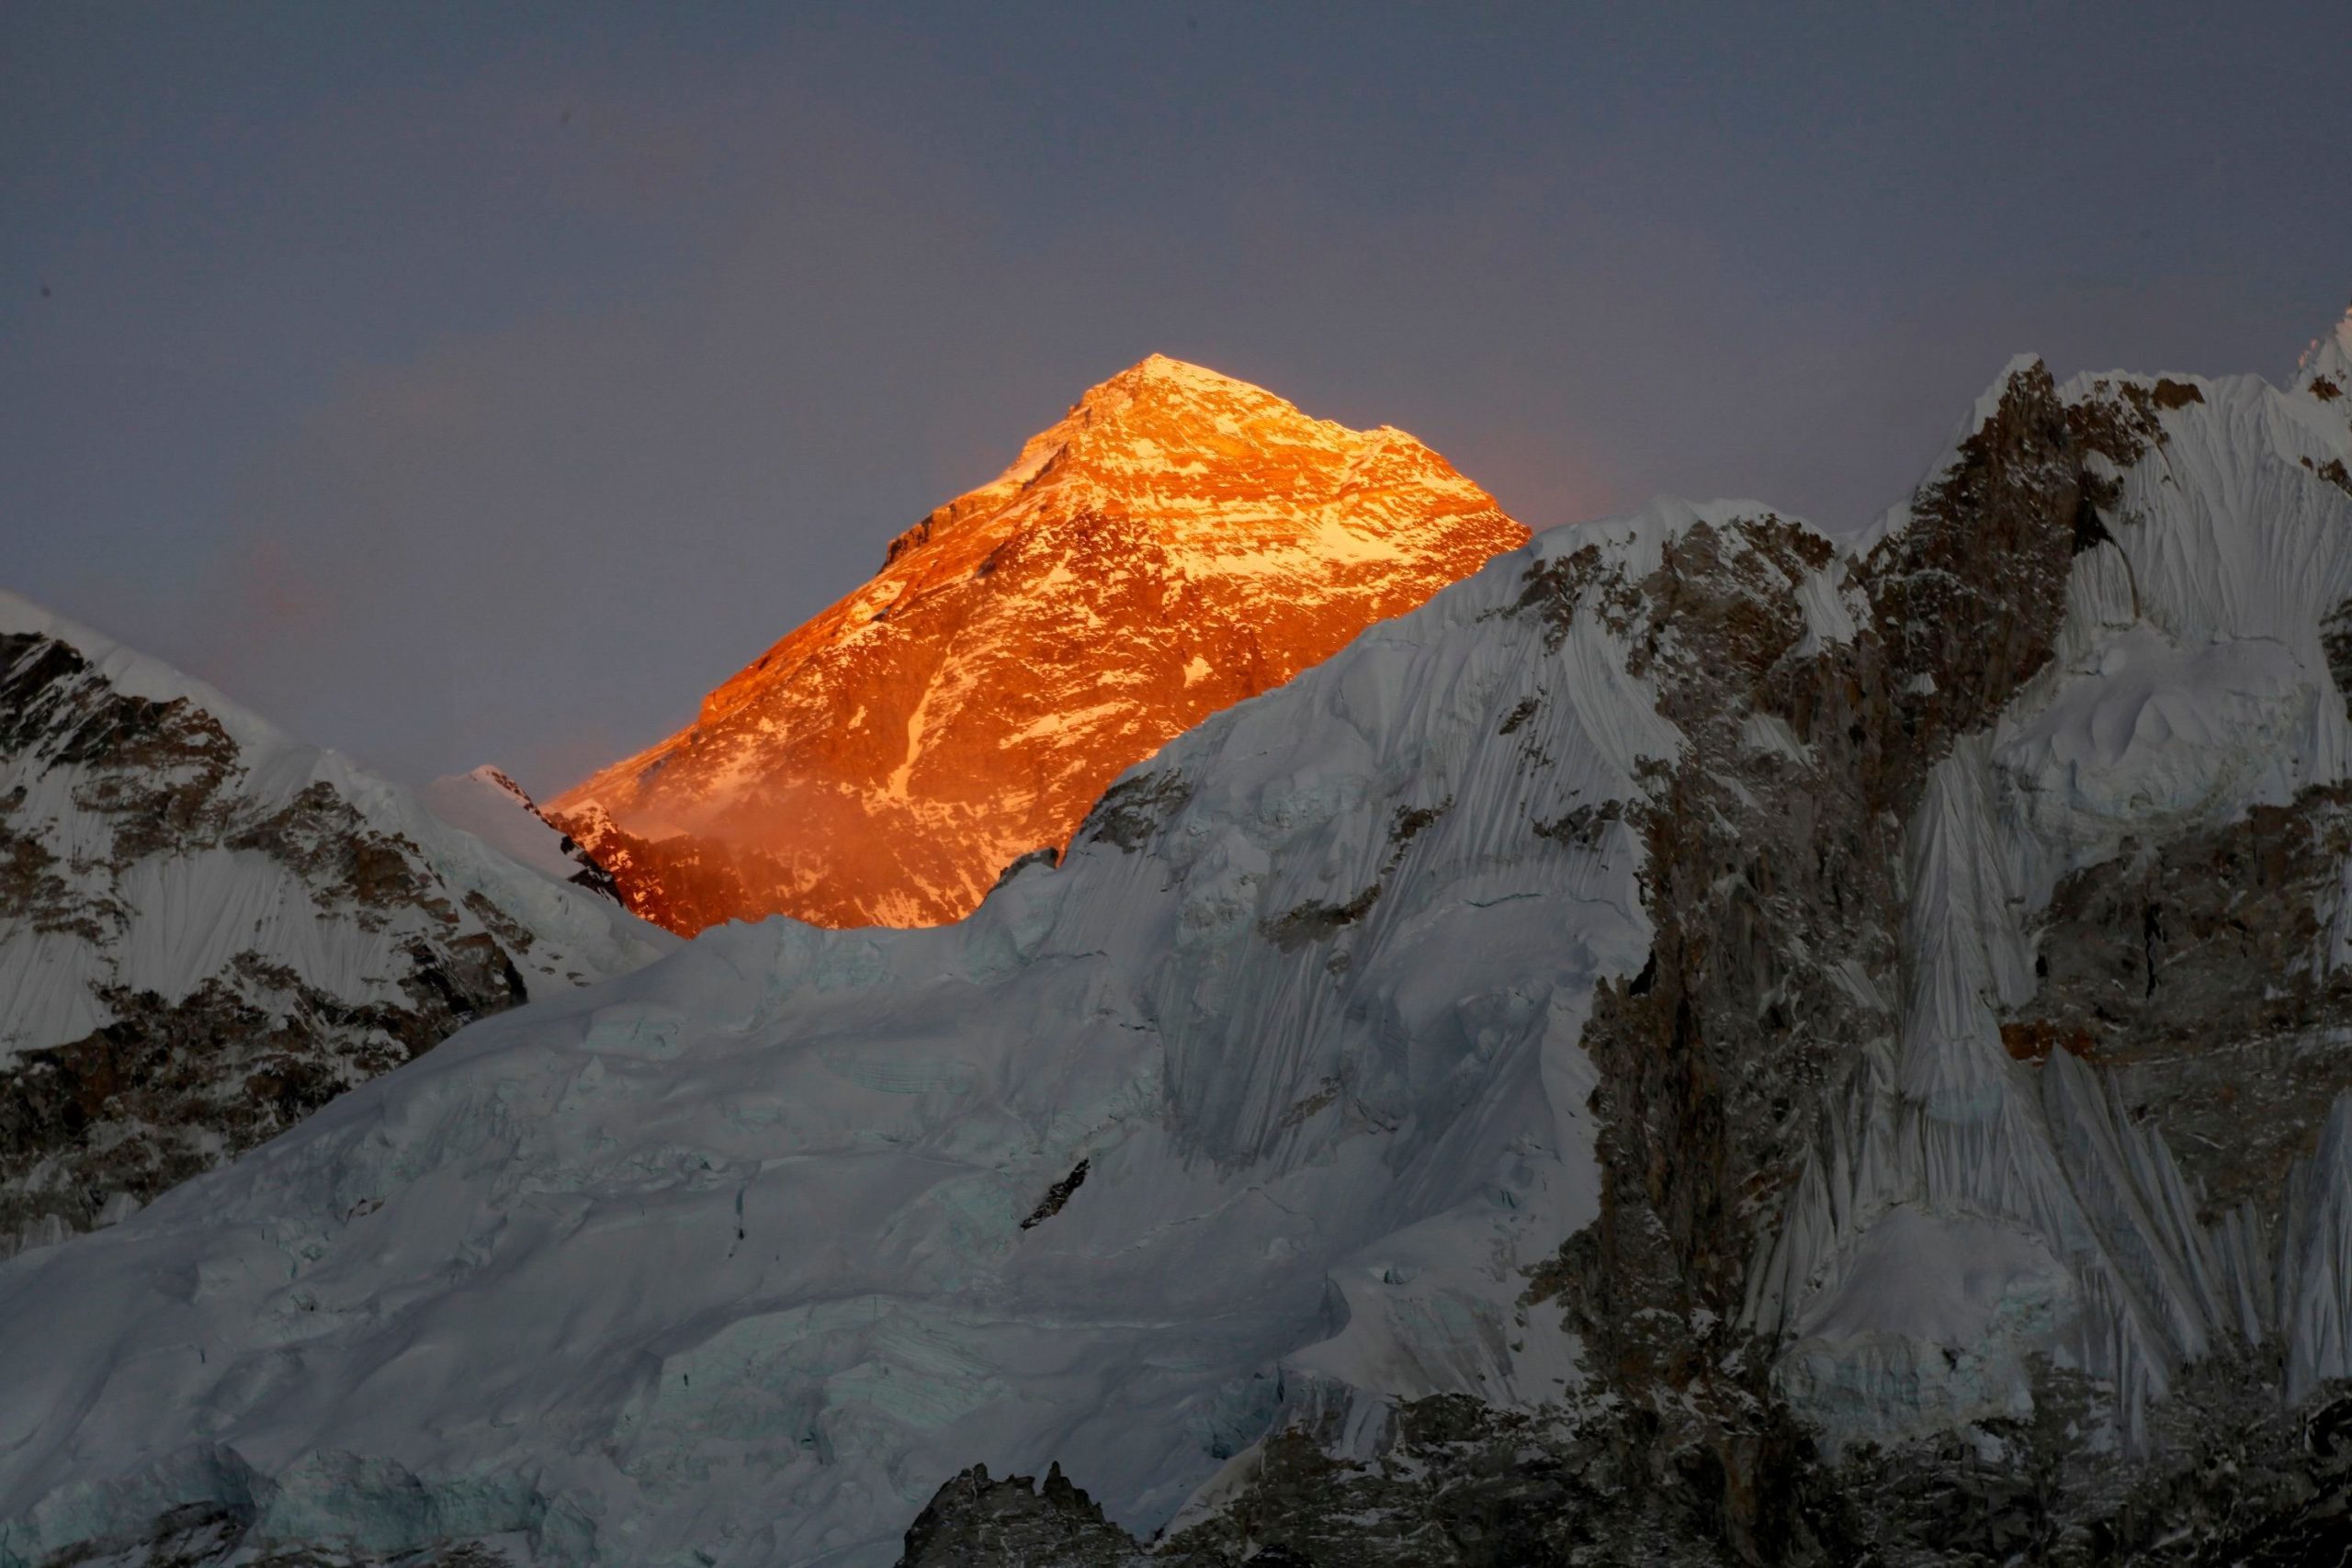 Mount Everest: The deadly history of the world's highest peak